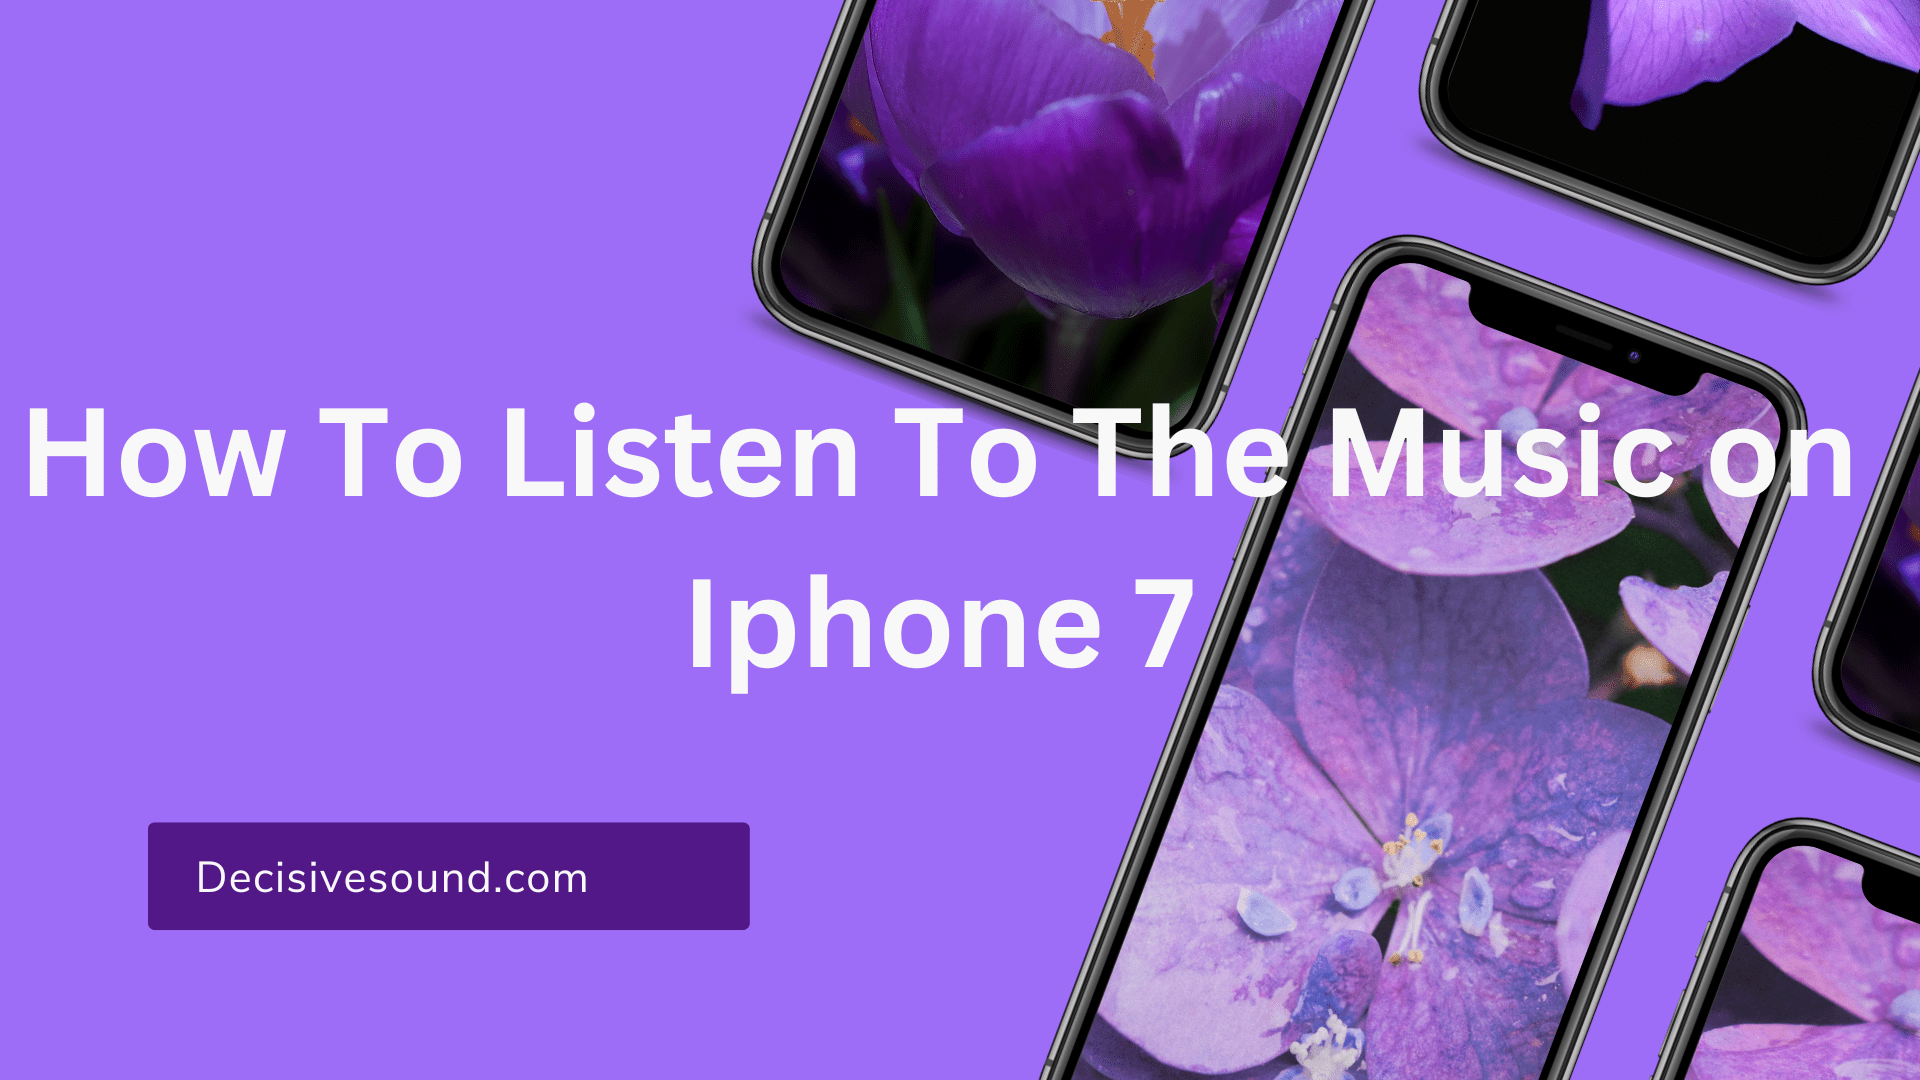 How To Listen To The Music on Iphone 7